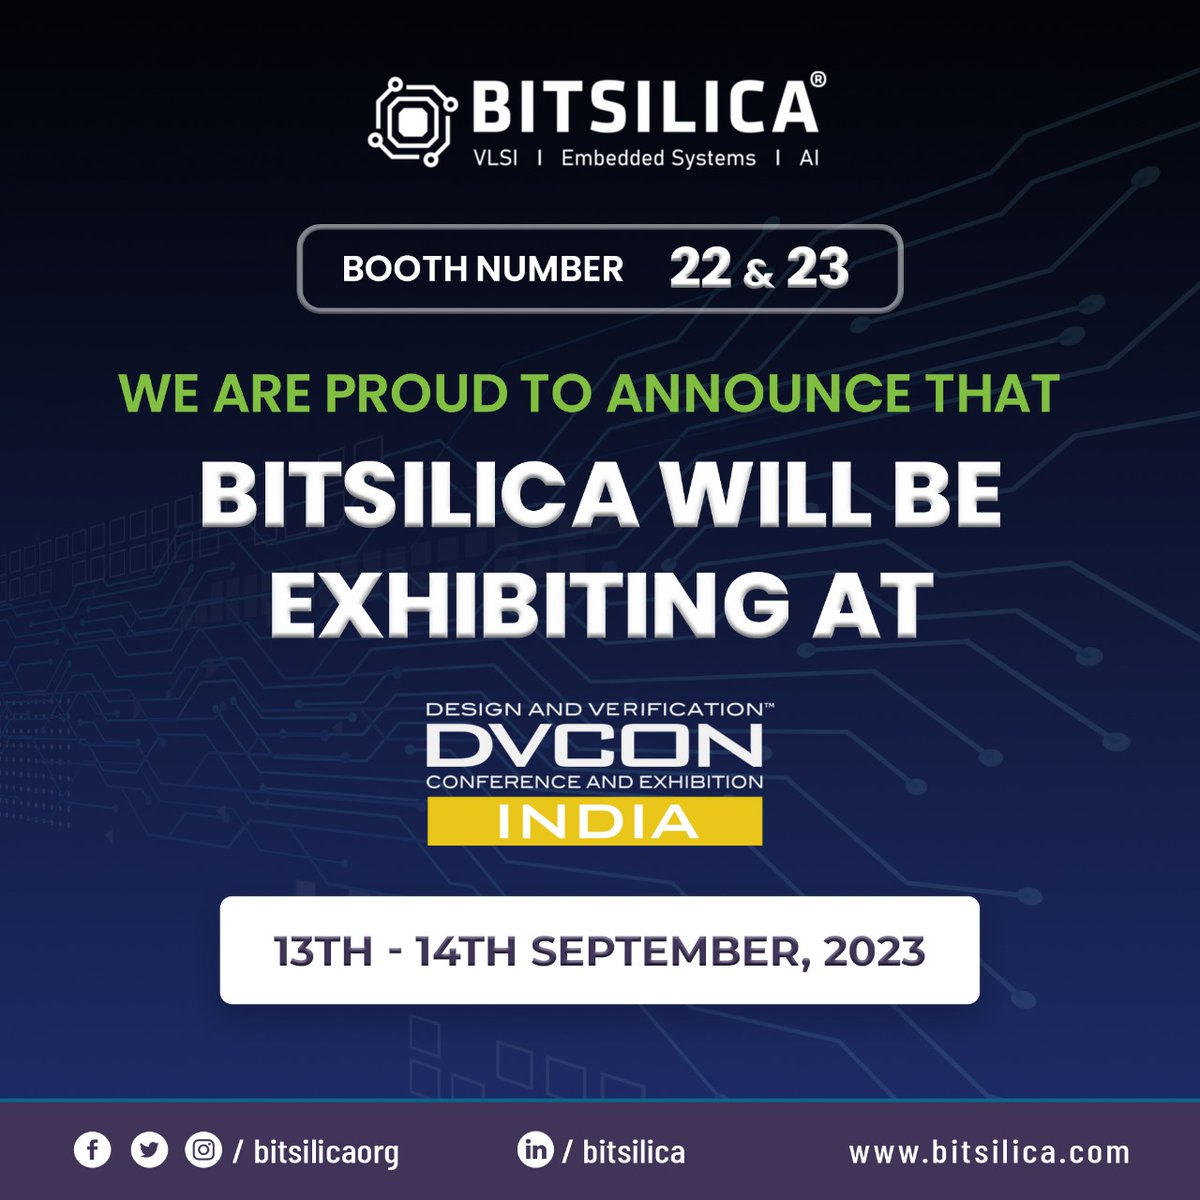 Bitsilica is proud to announce that we will be exhibiting at DV Con 2023 on 13th-14th September at Radisson Blu, Mahrathahalli, Bangalore !

Please do visit us at our exhibit booth no. 22 & 23 !

 #dvcon2023 #dvcon #design #conference #corportaeevent